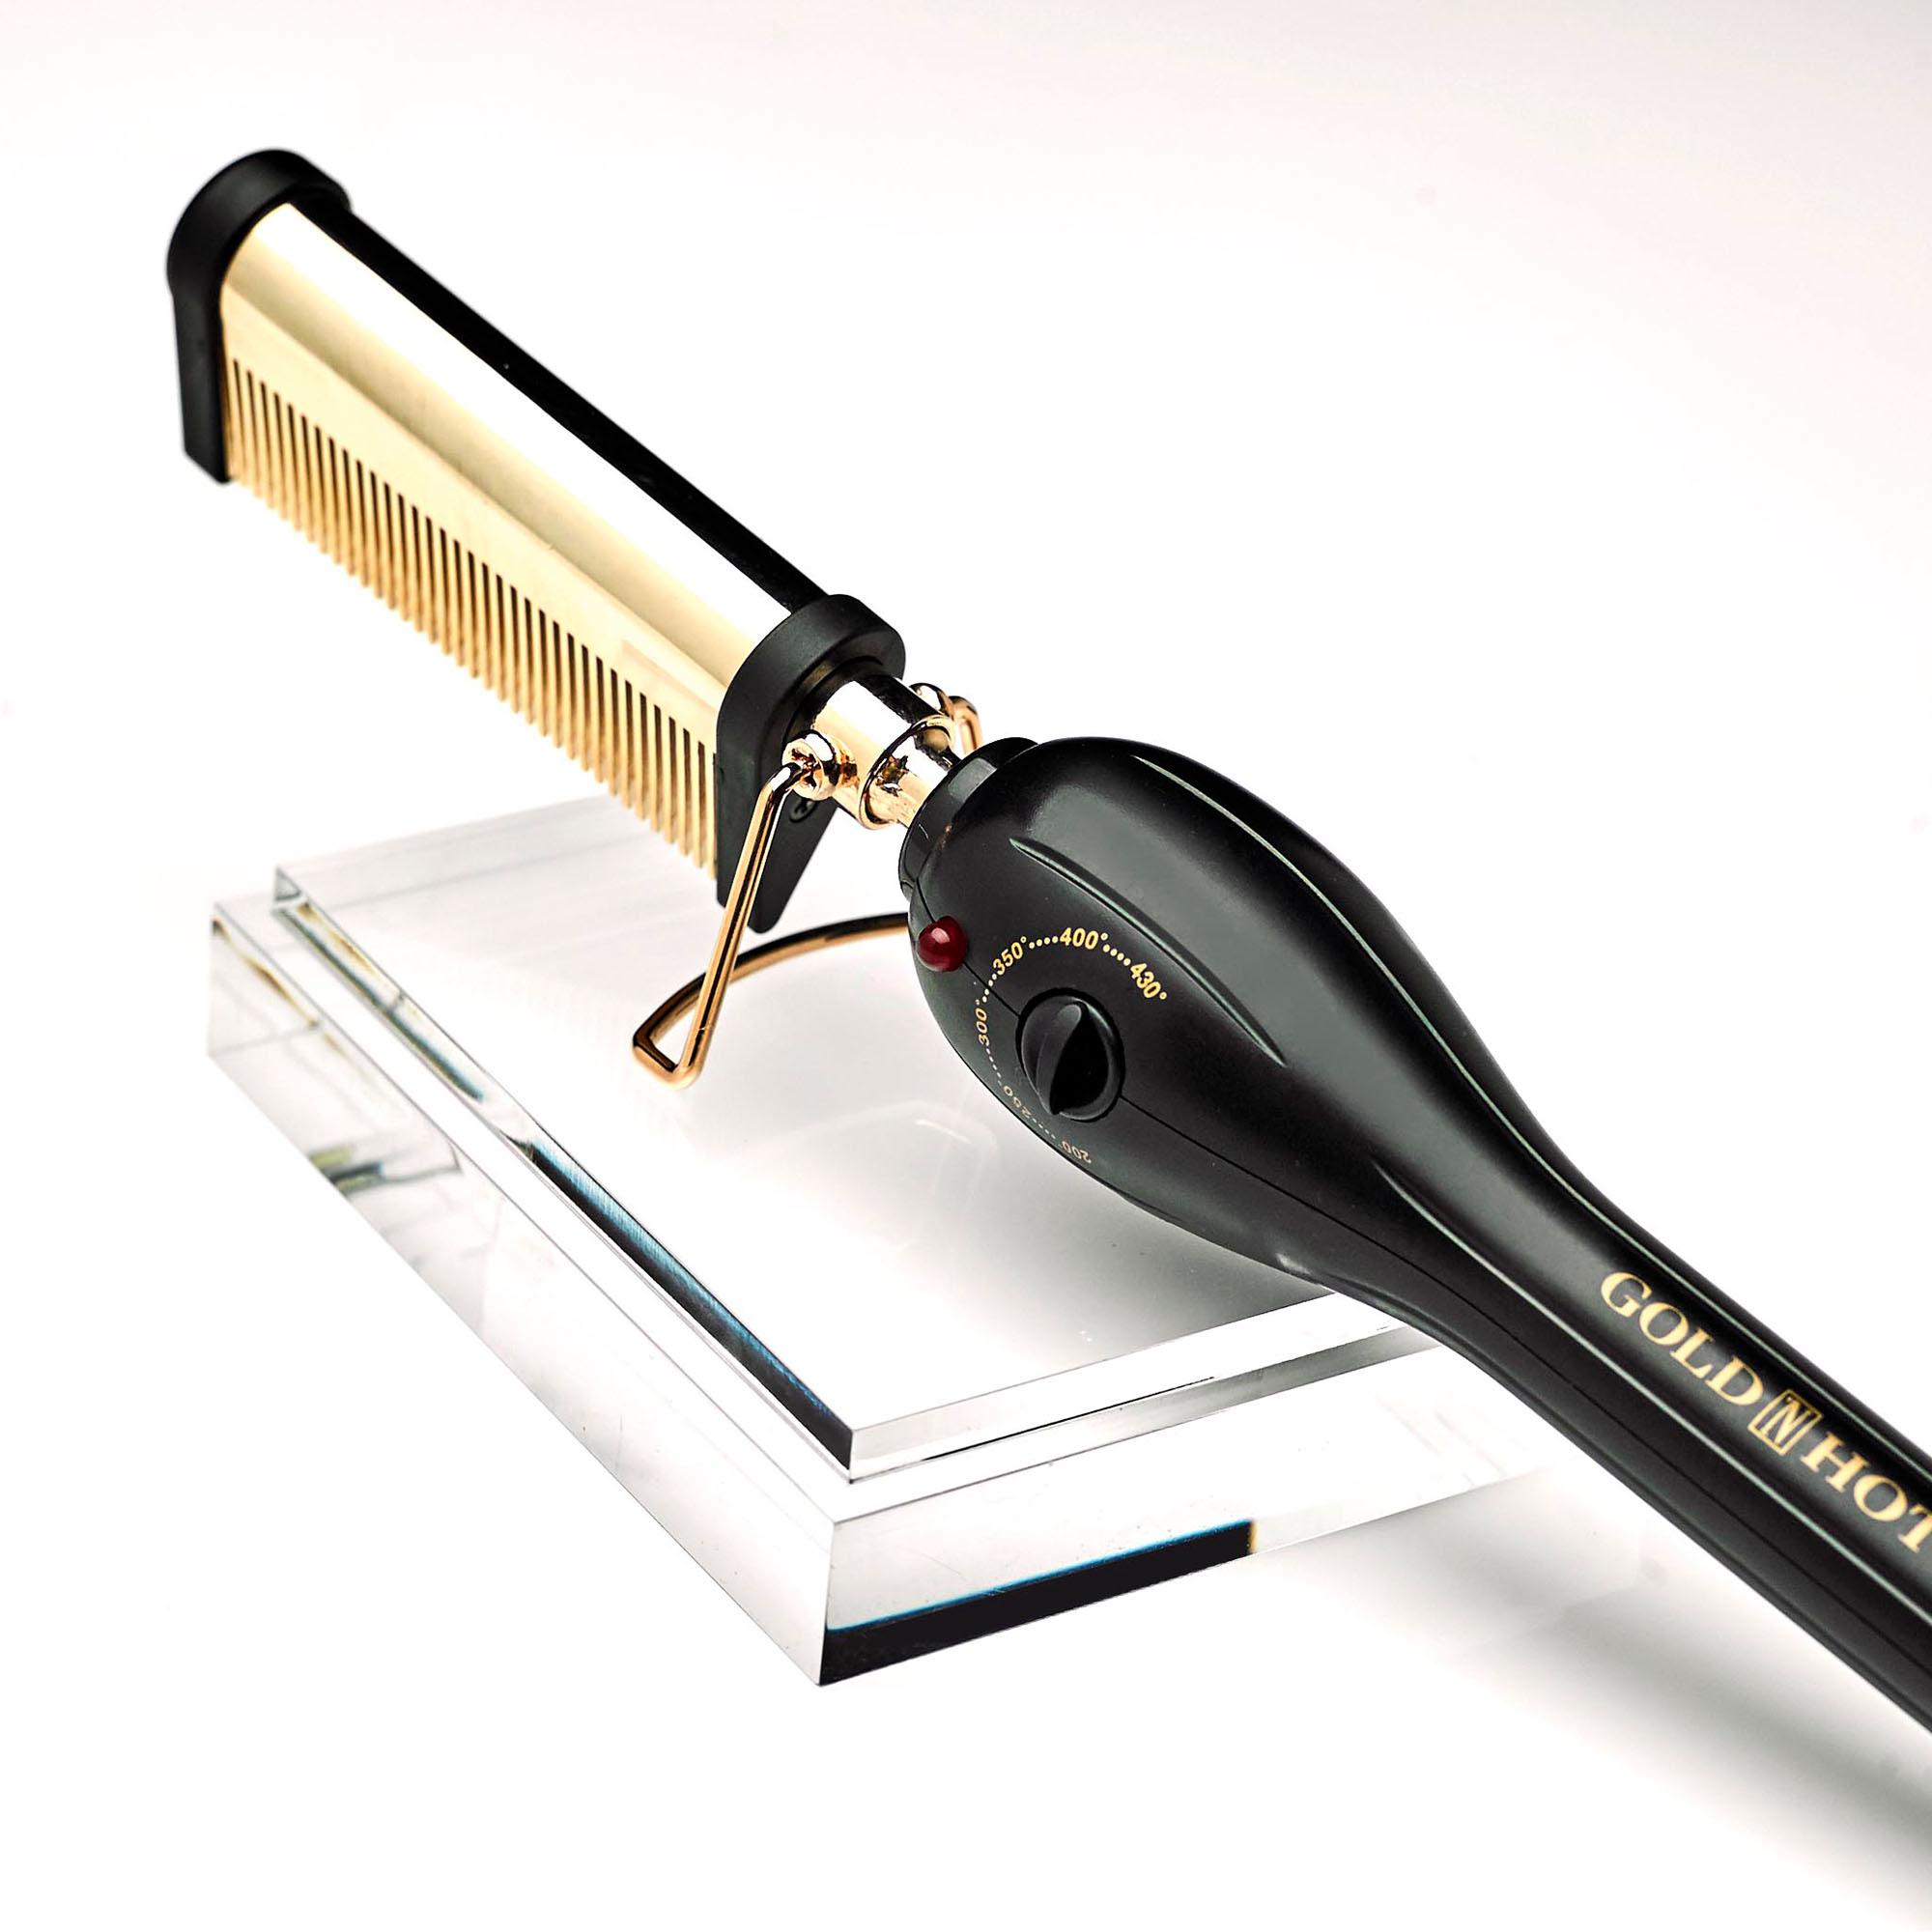 Gold N Hot 24K Gold Hair Straightening and Pressing Comb - image 5 of 6